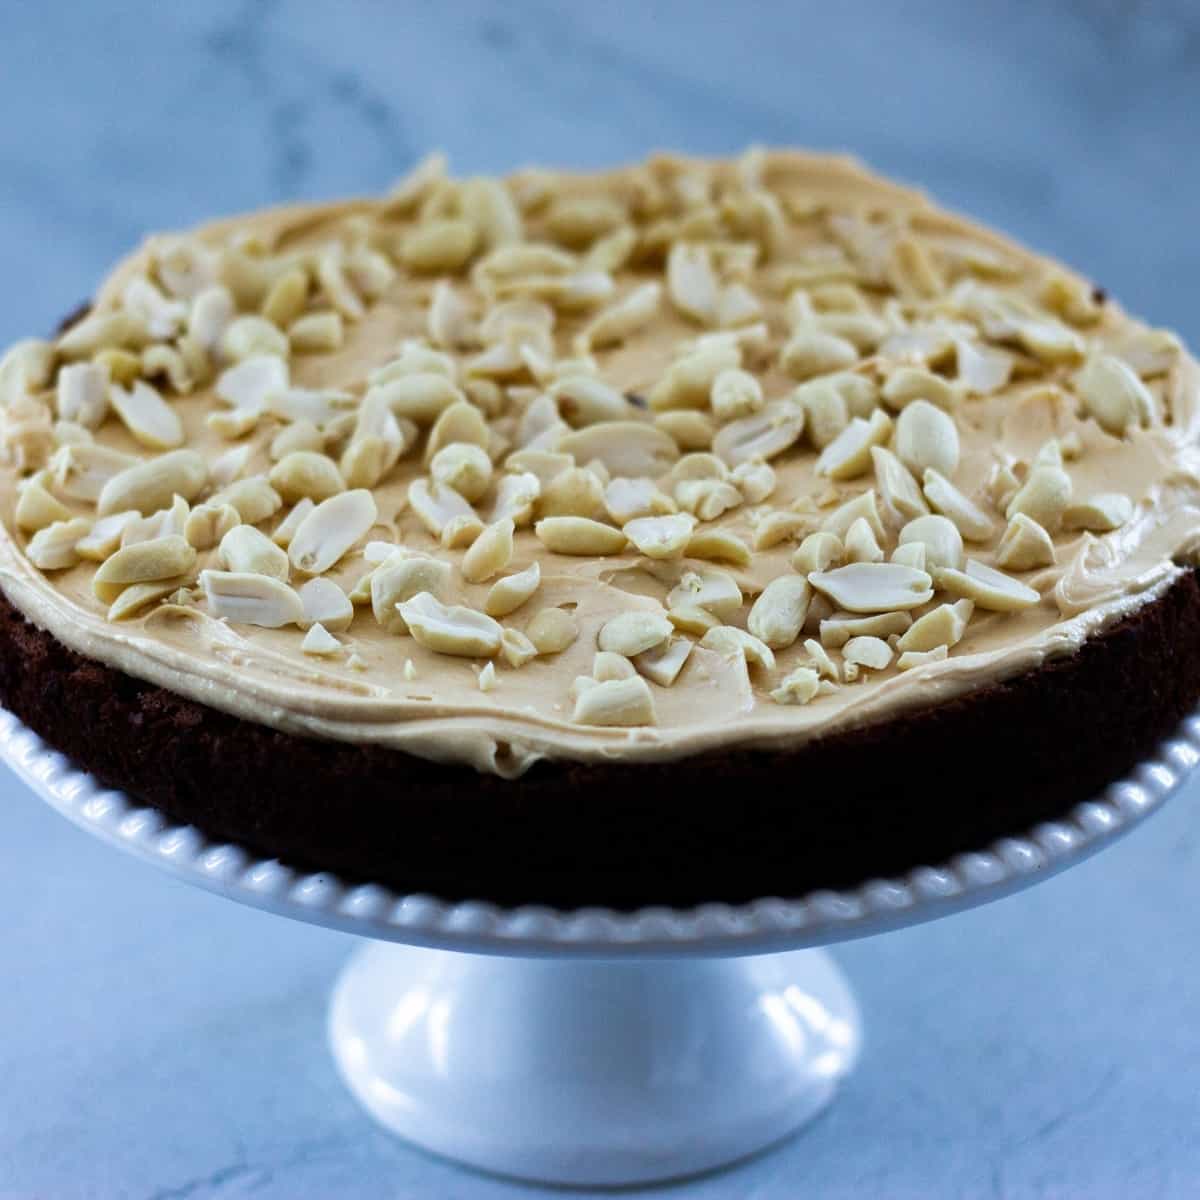 A vegan chocolate cake on a cake stand decorated with chopped peanuts